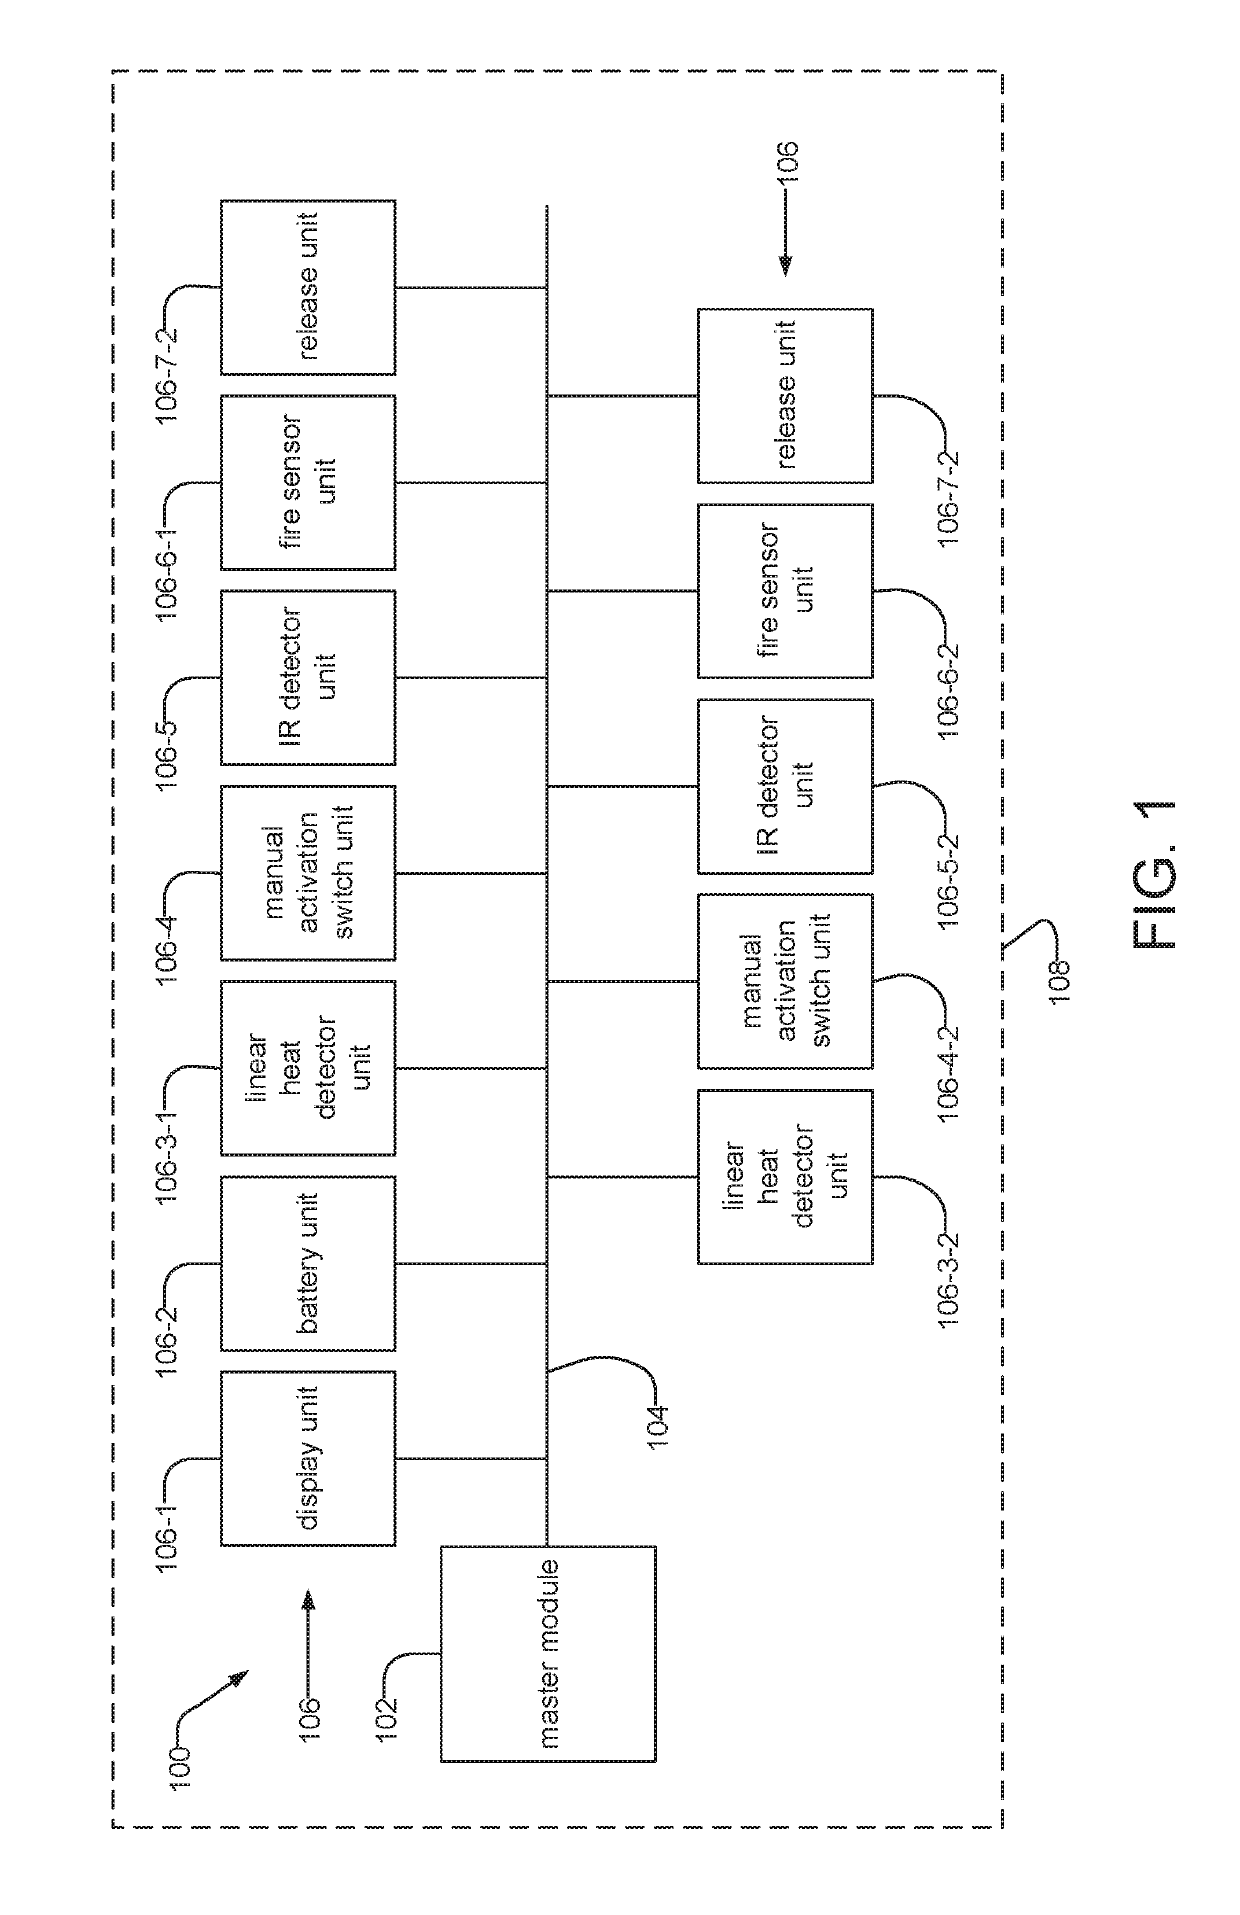 Addressing method for slave units in fire detection system